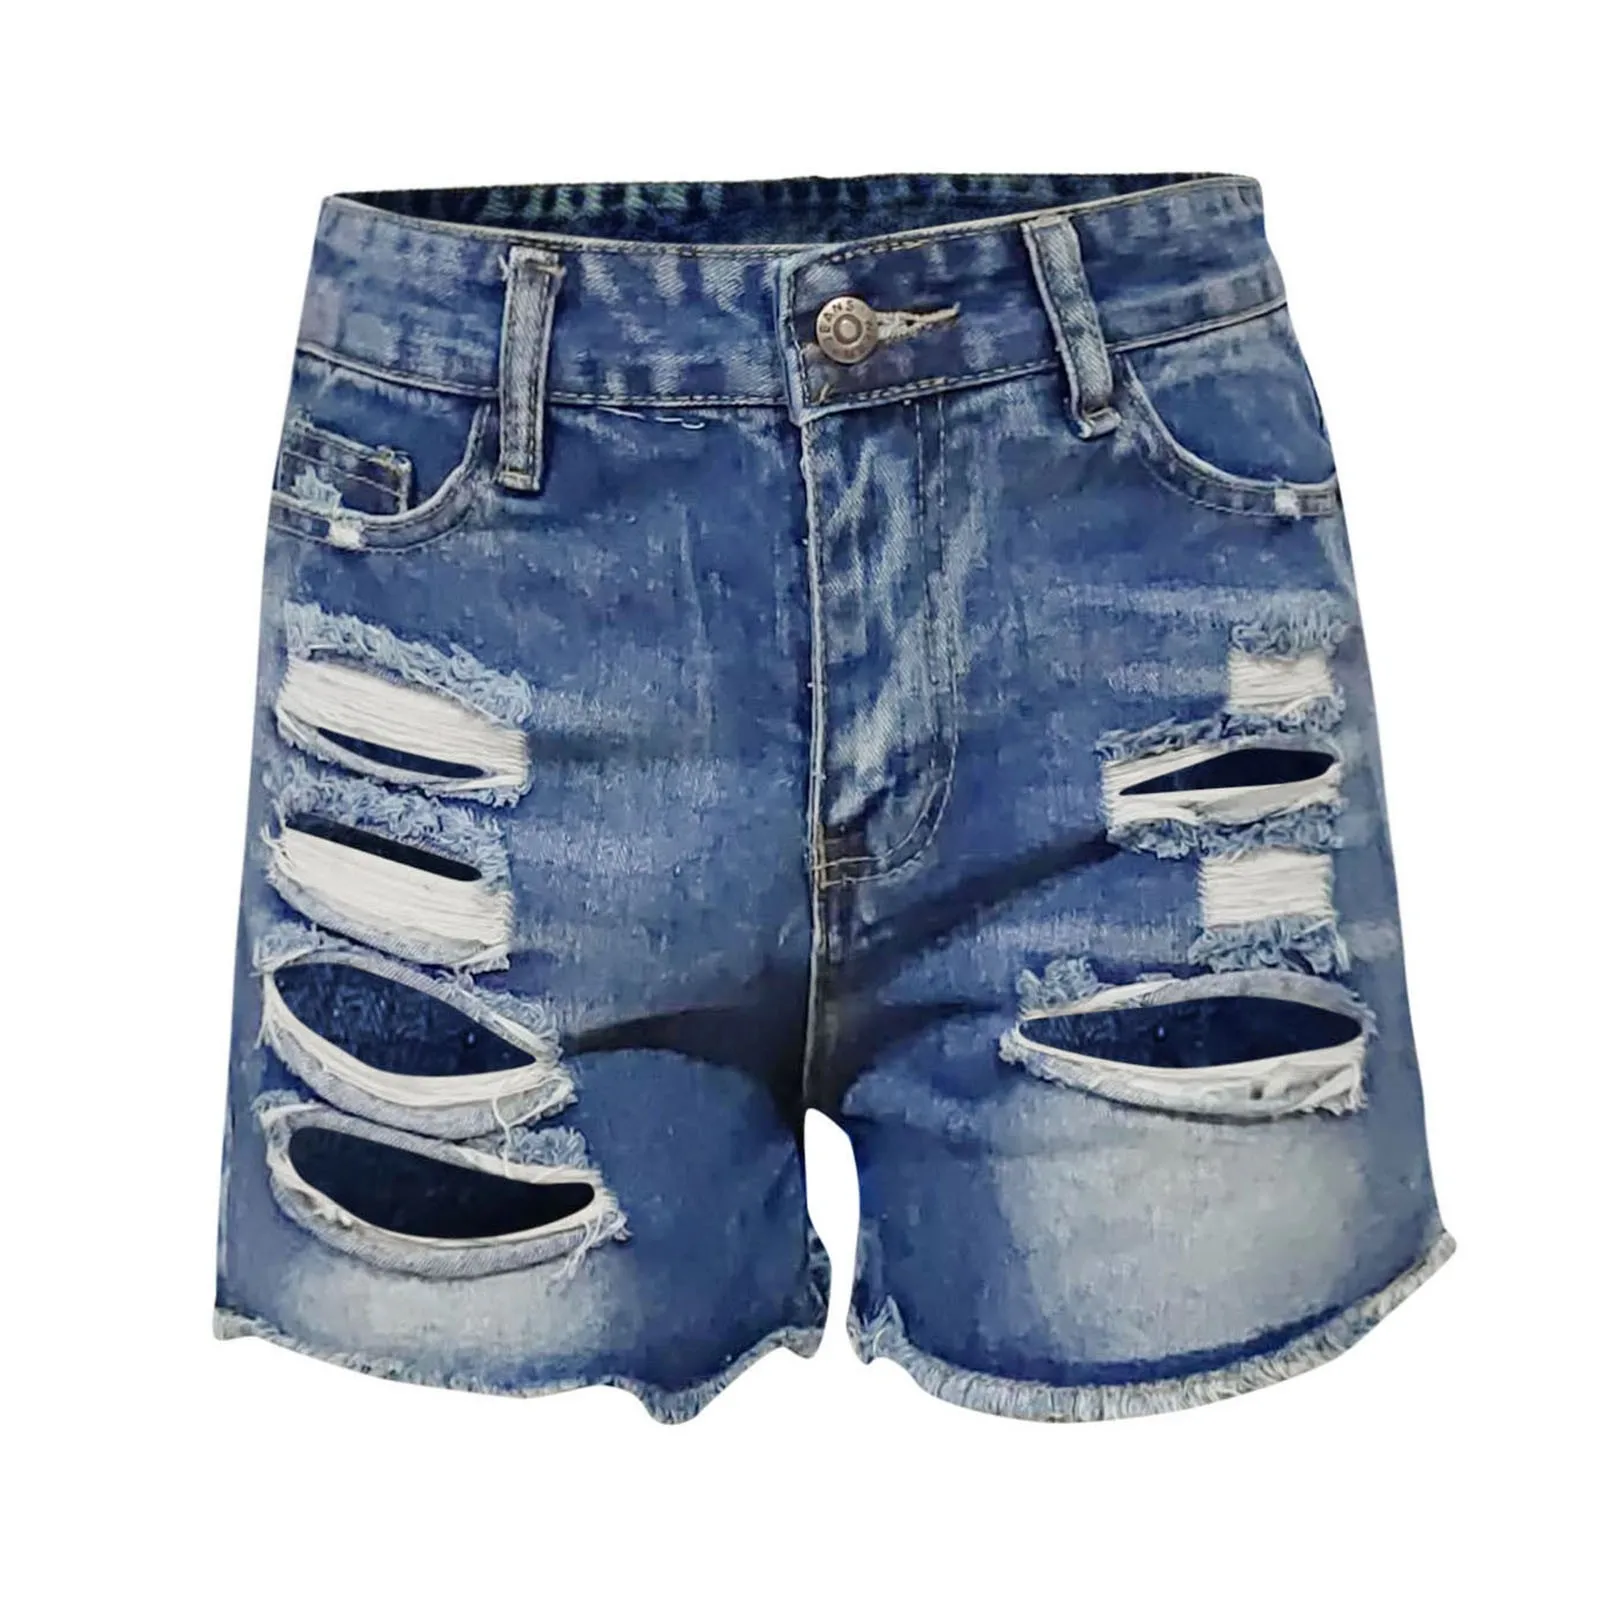 Summer Fashion Street Ripped Jeans Shorts For Women High Waist Soft Strech Denim Skinny Shorts Female Casual Outdoor Shorts